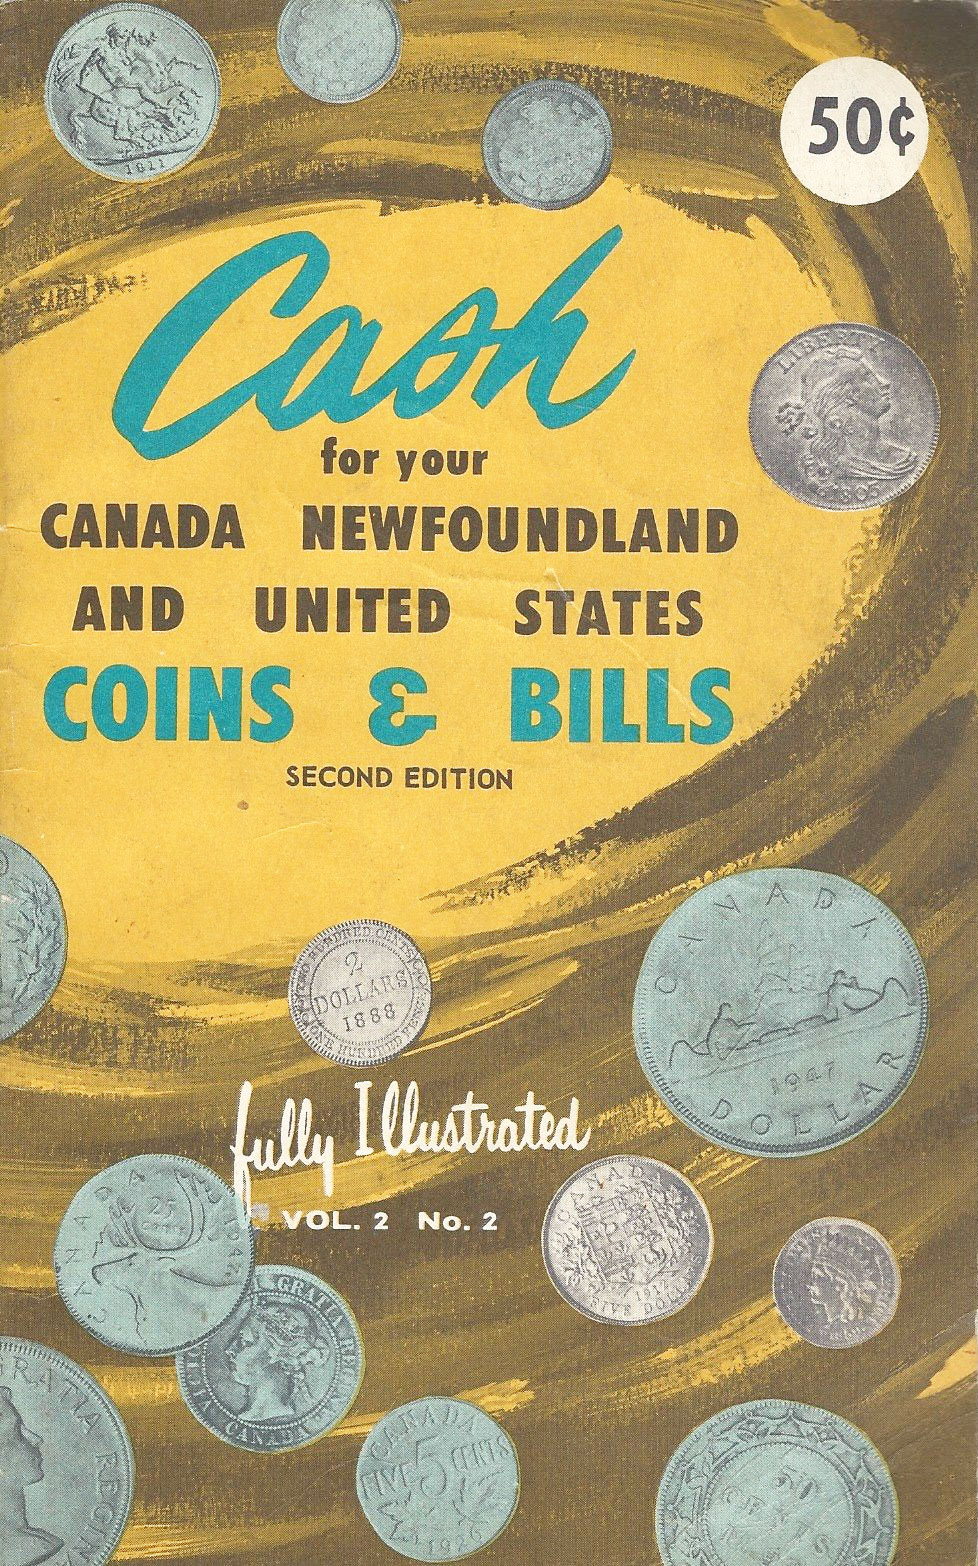 Cash for your Canada Newfoundland and United States Coins & Bills Vol. 2 No. 2